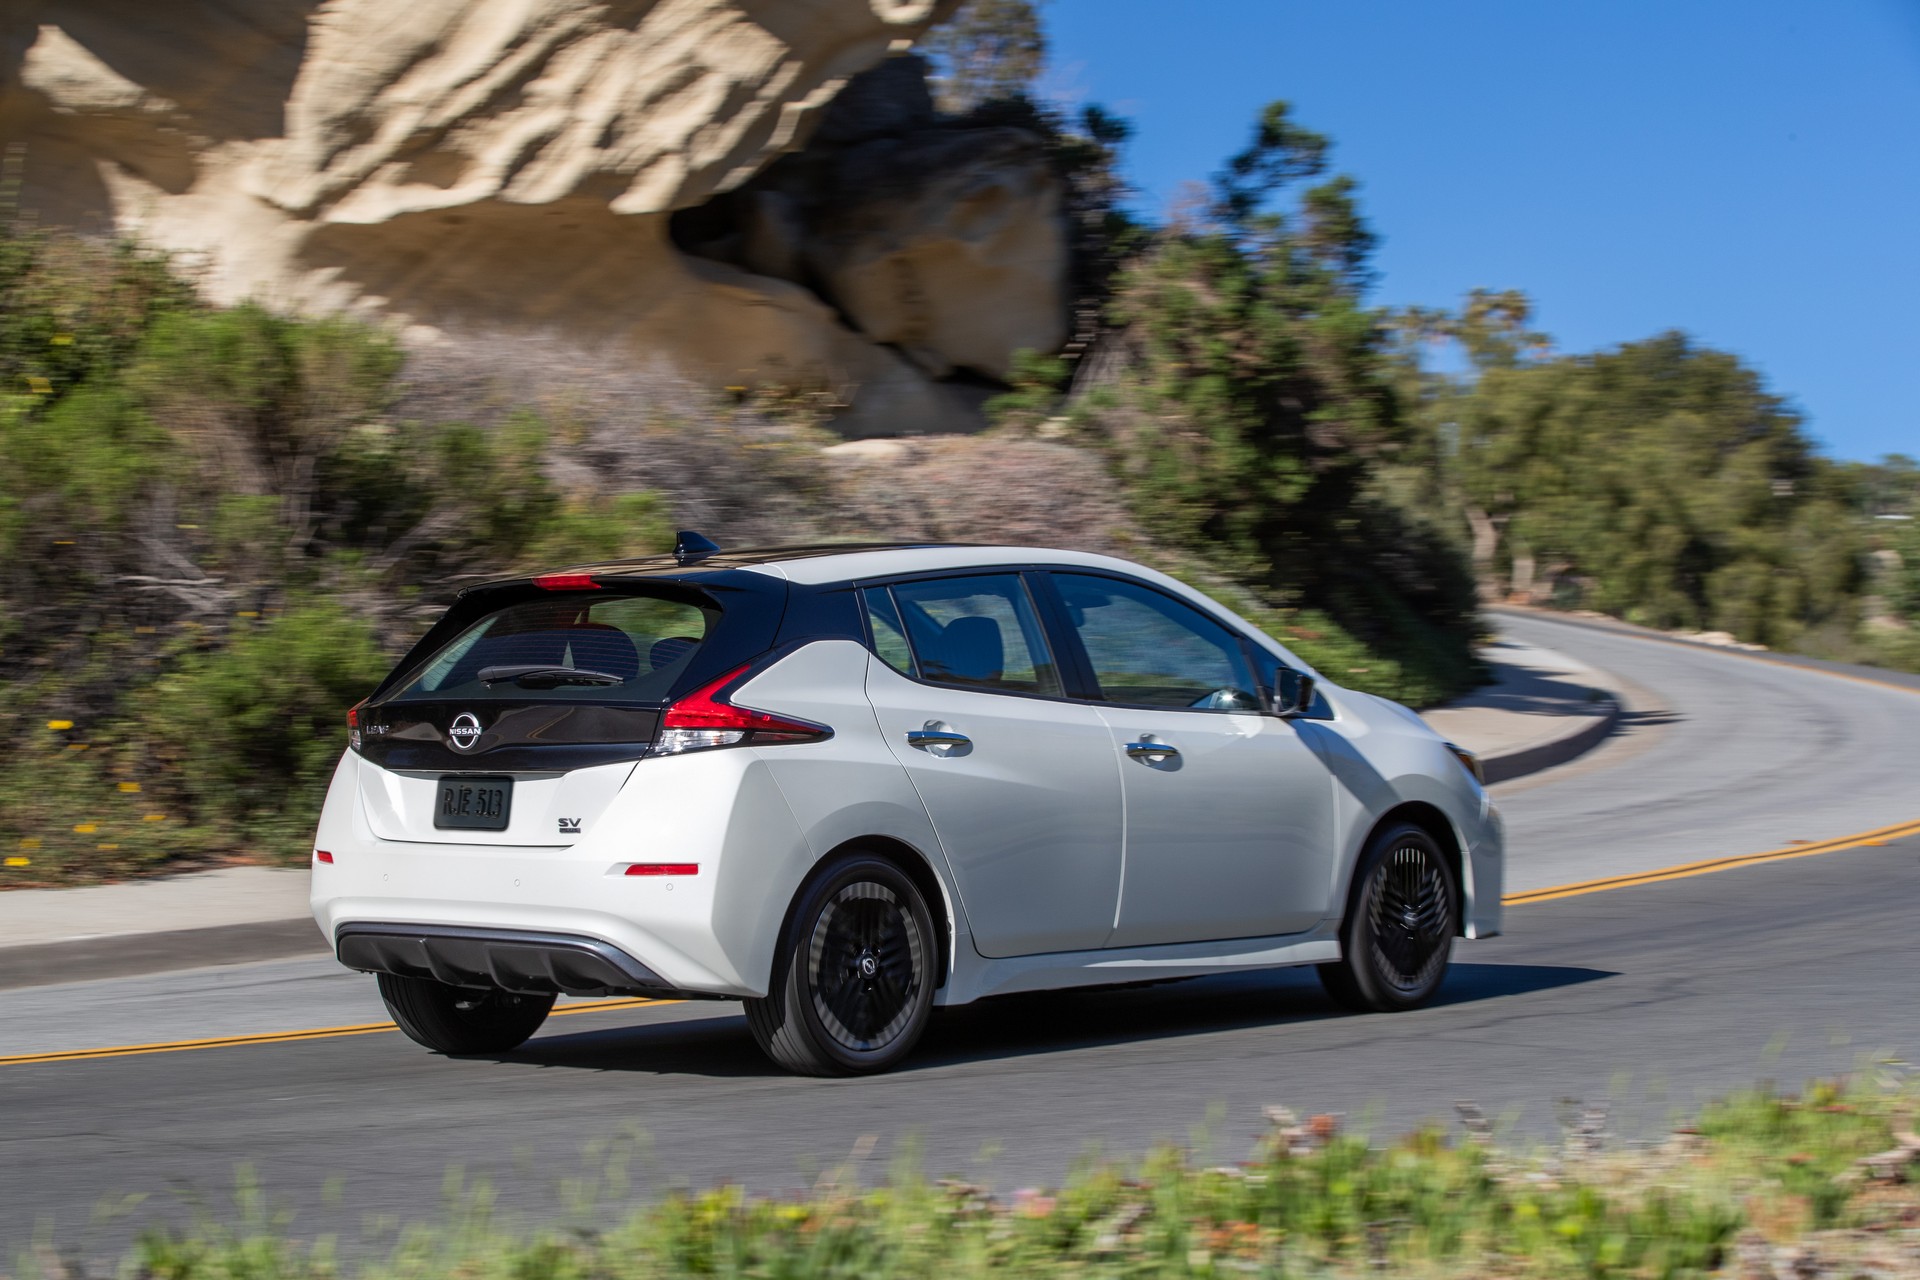 The 2023 Nissan Leaf has been redesigned and priced at $ 400